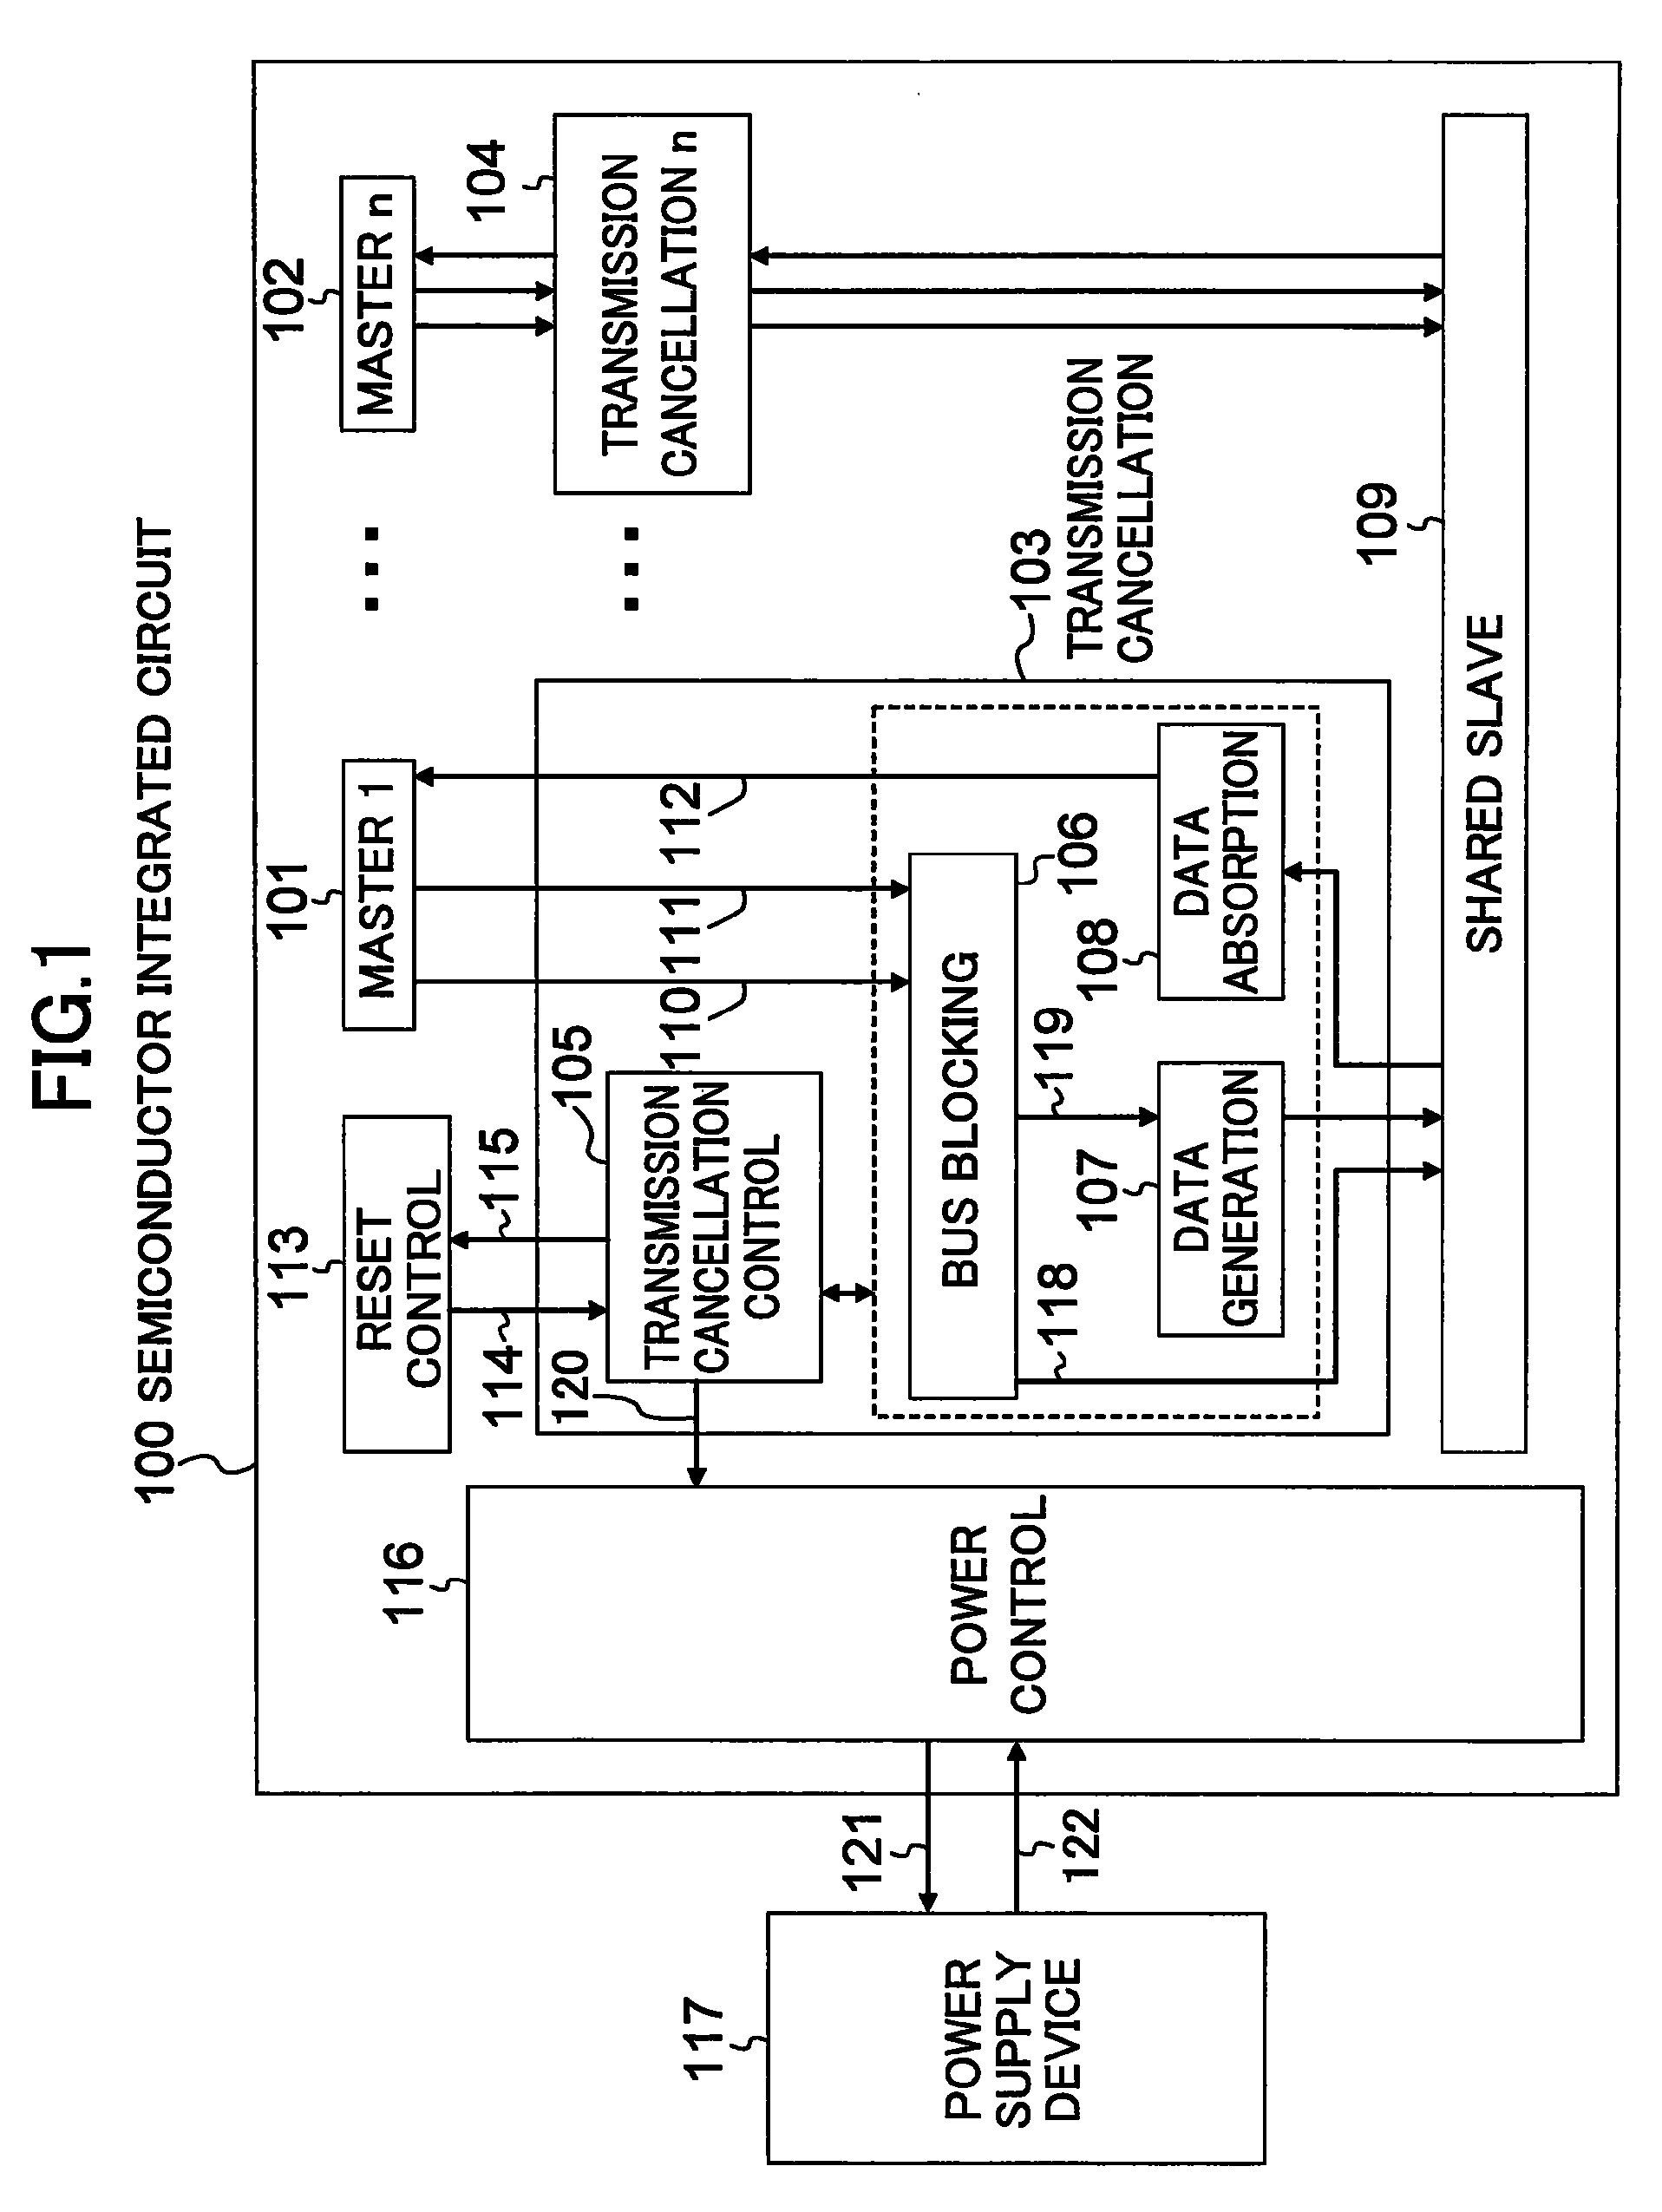 System and method for bus transmission cancellation